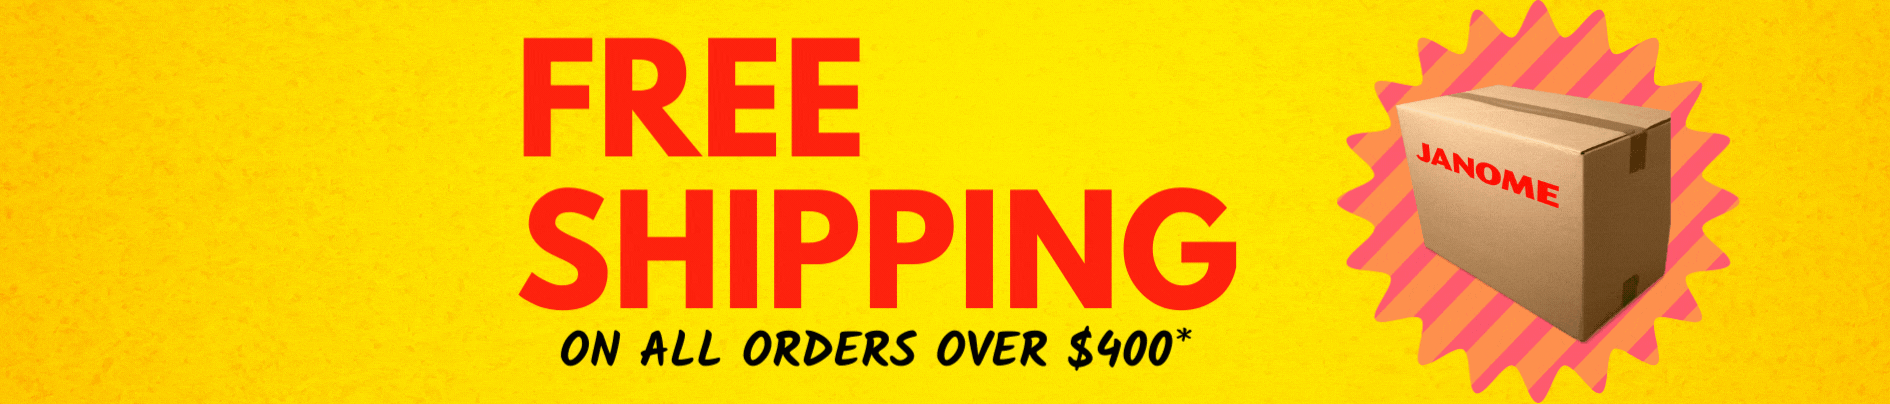 Free Shipping on Most sewing machine orders!